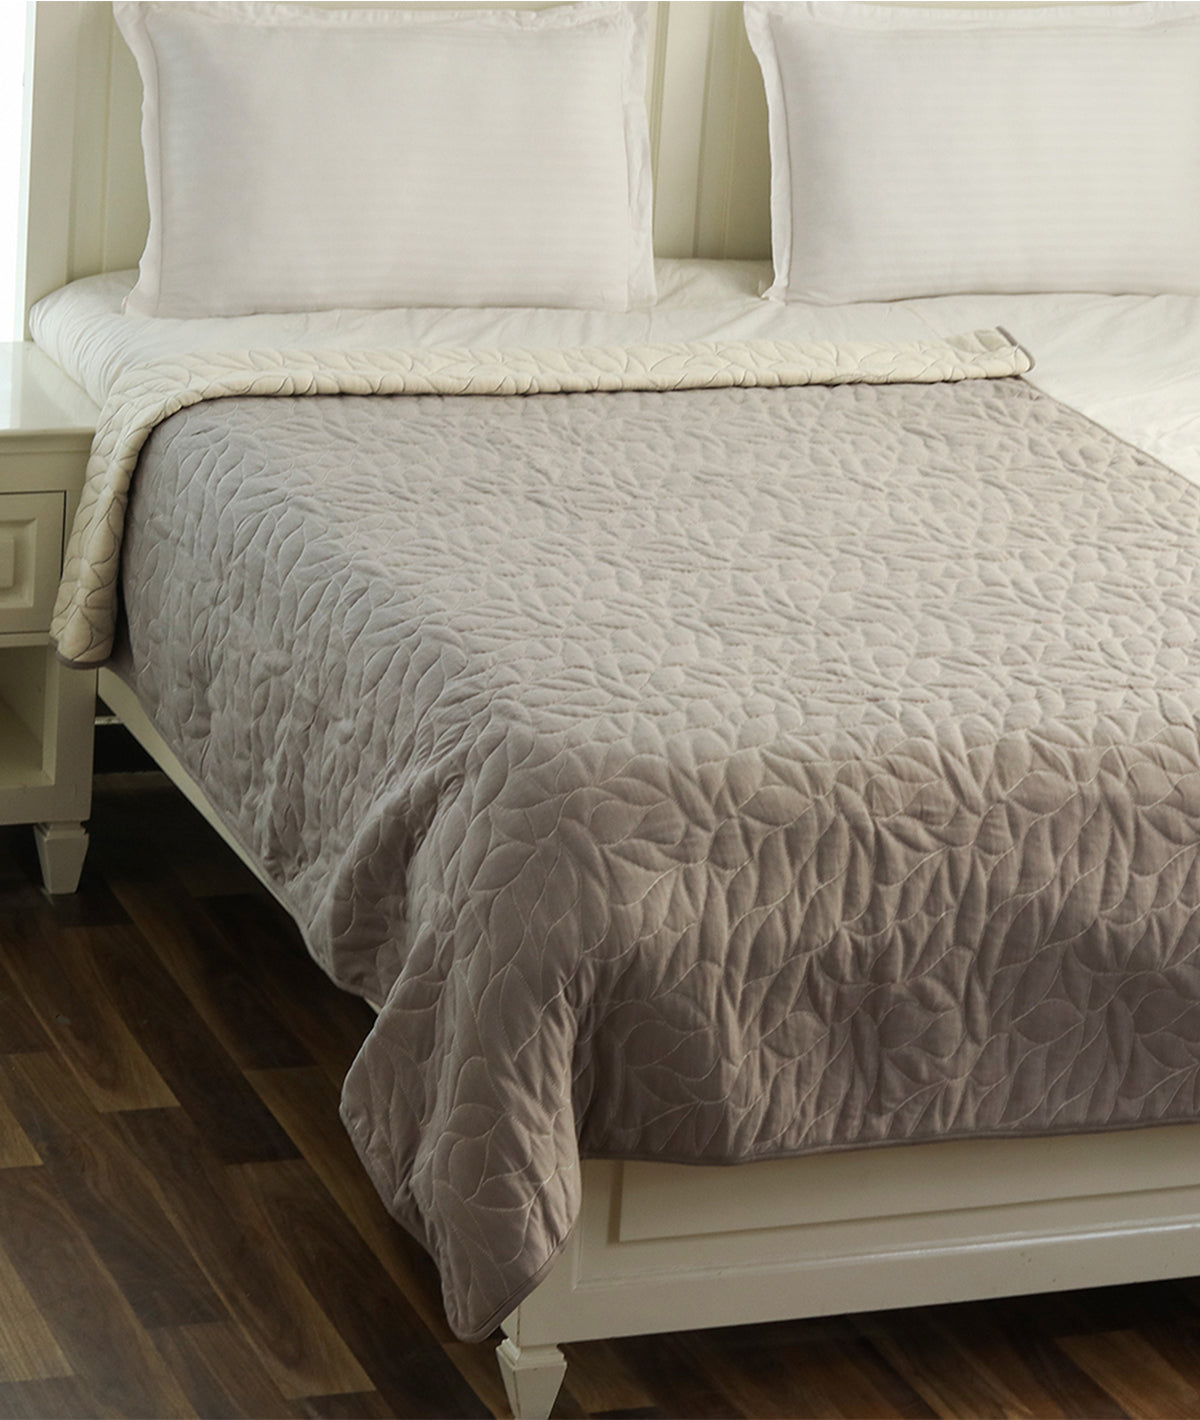 Garden Beauty Cotton Knitted Single Bed Dohar / Quilt (Light Grey & Natural)